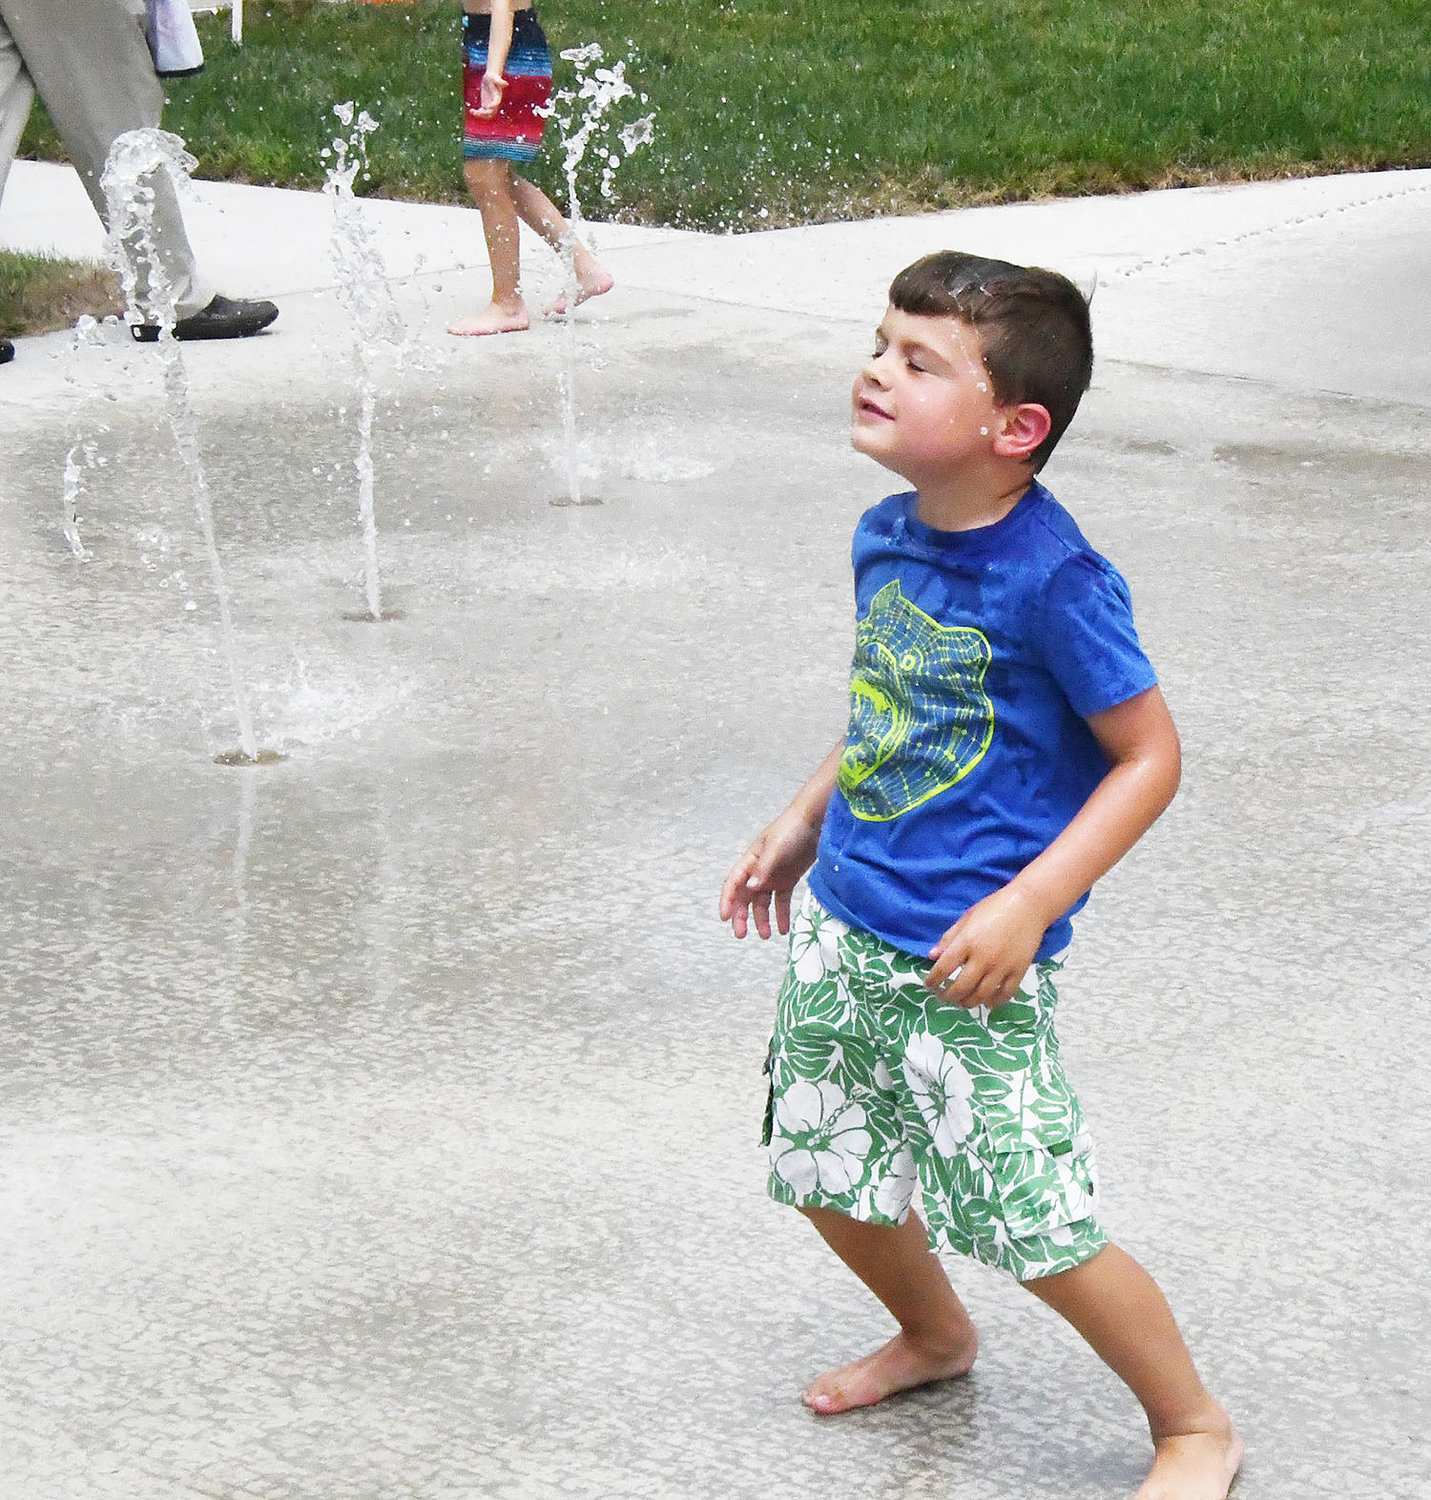 With temperatures approaching 90 degrees on Friday, July 8, the Tannehill Park Splash Pad was a perfect place to cool off.